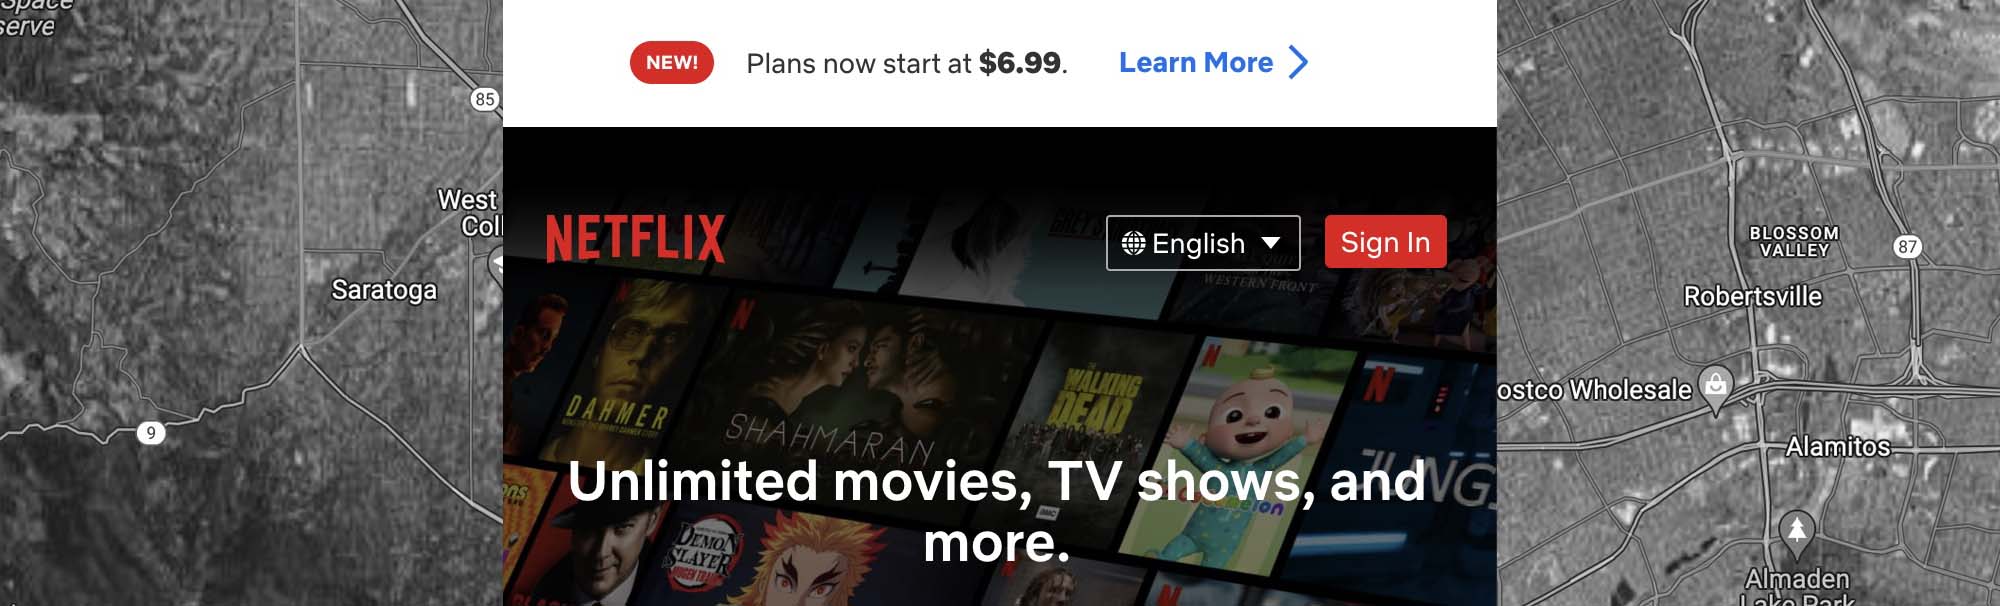 Netflix sign-up $6.99 with map